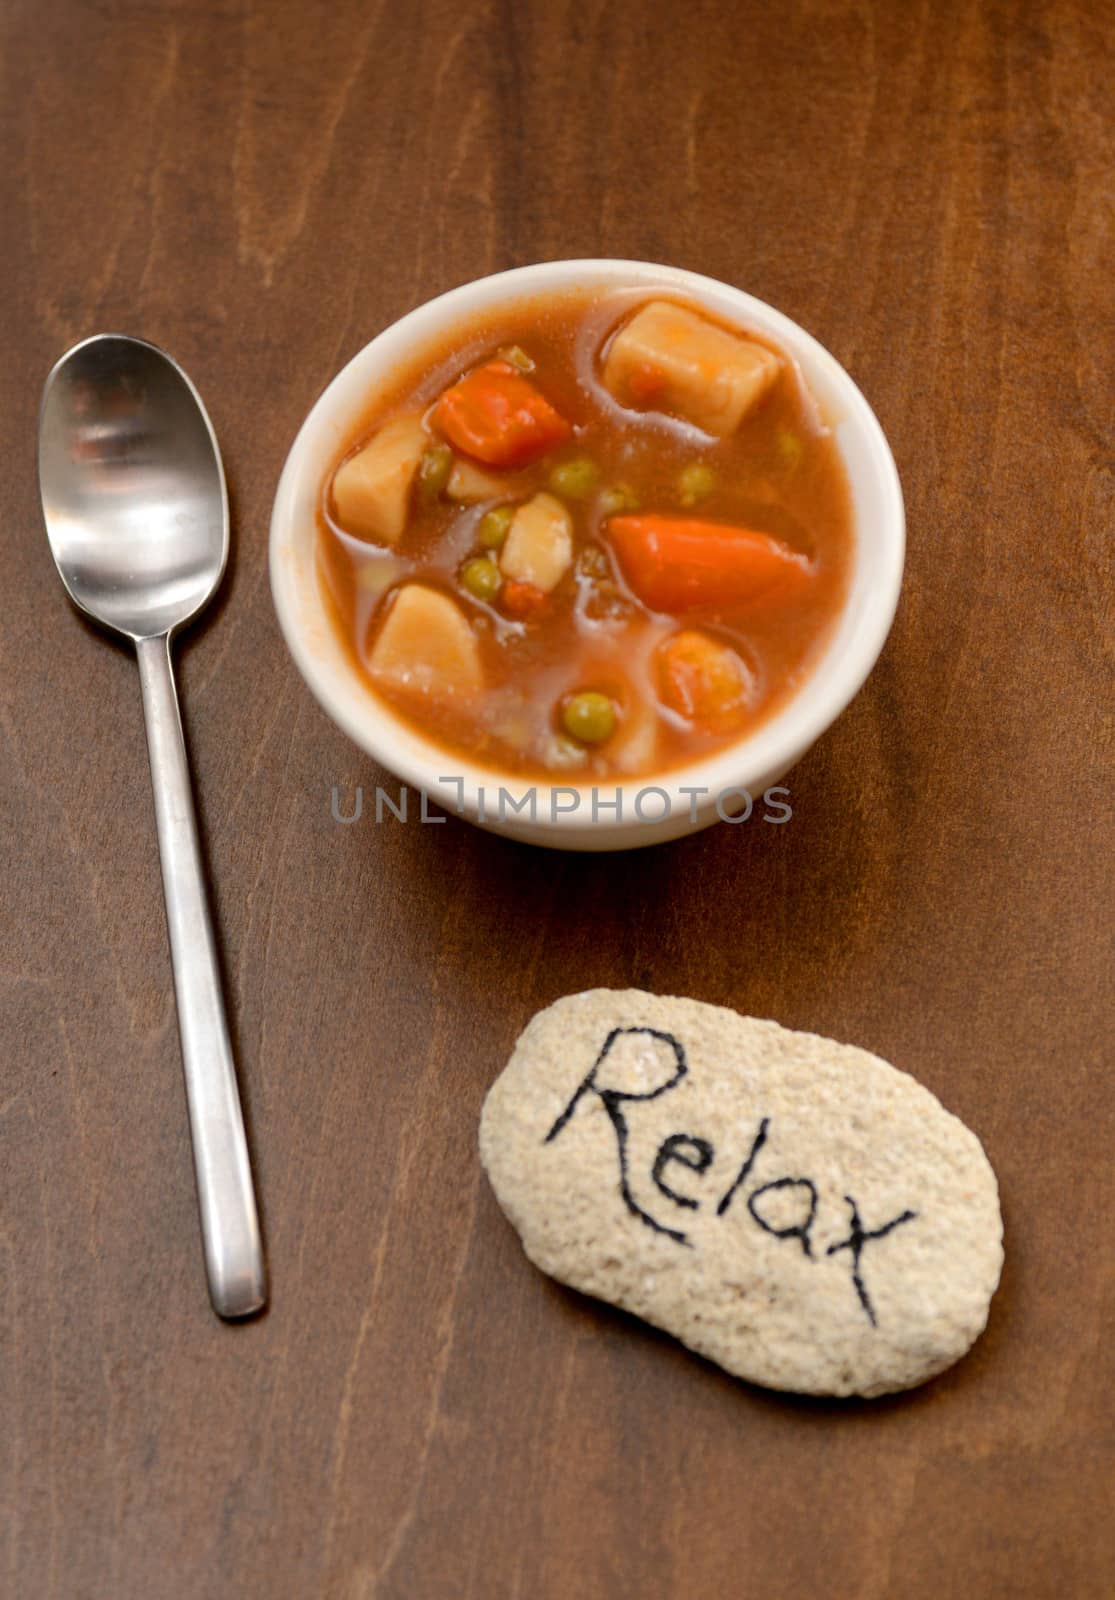 relax with bowl of vegetable soup by ftlaudgirl